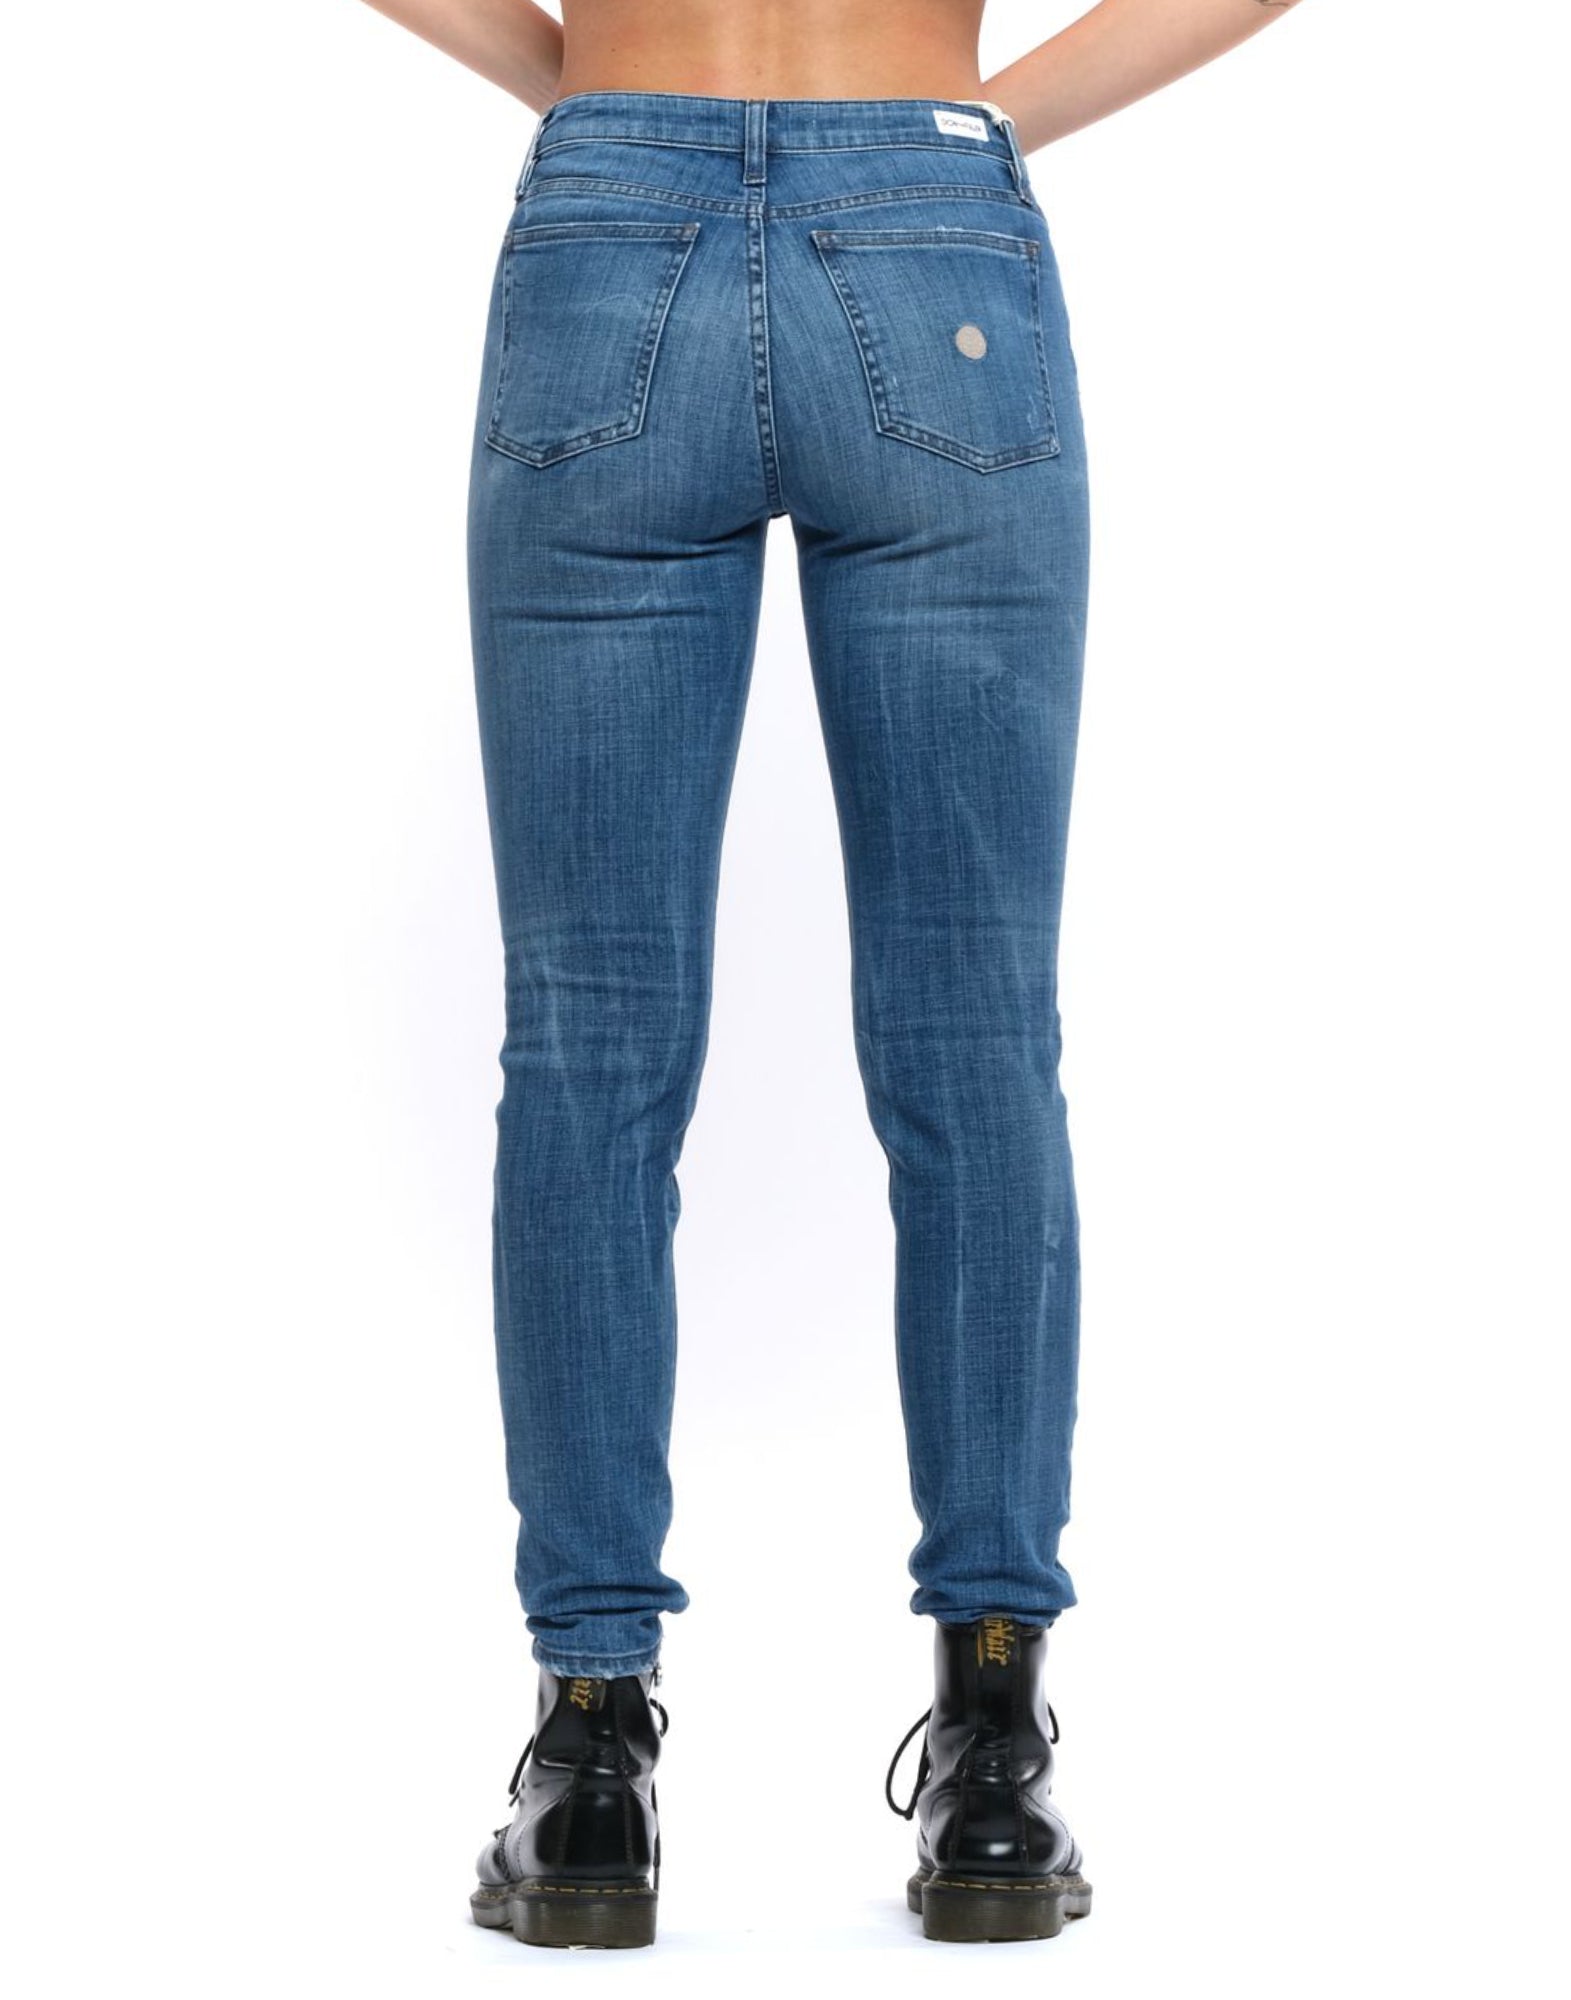 Jeans para mujeres DON THE FULLER Cannes 15F